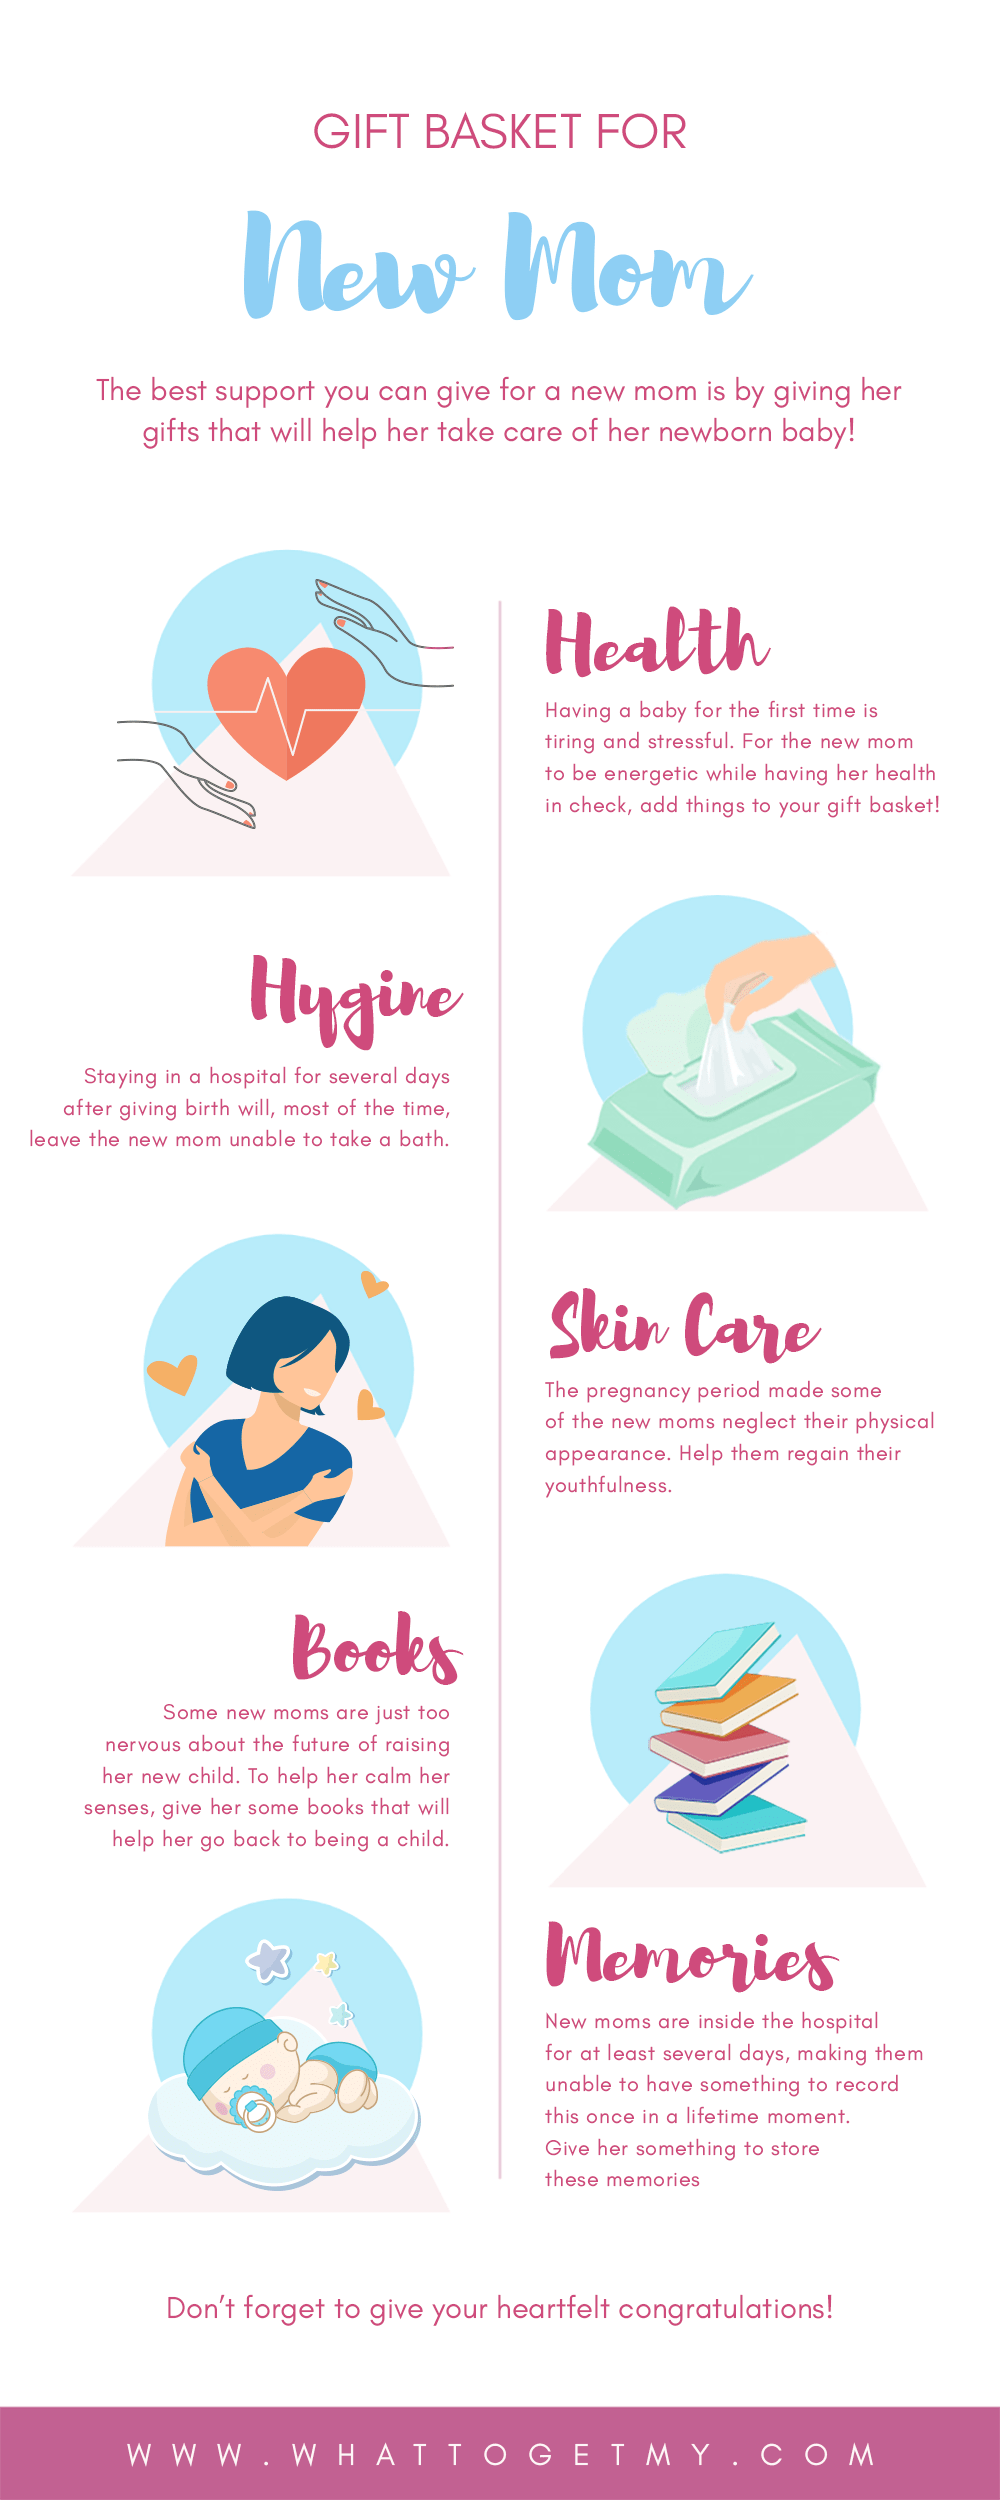 Infographic Gift Basket For New Mom in The Hospital-min